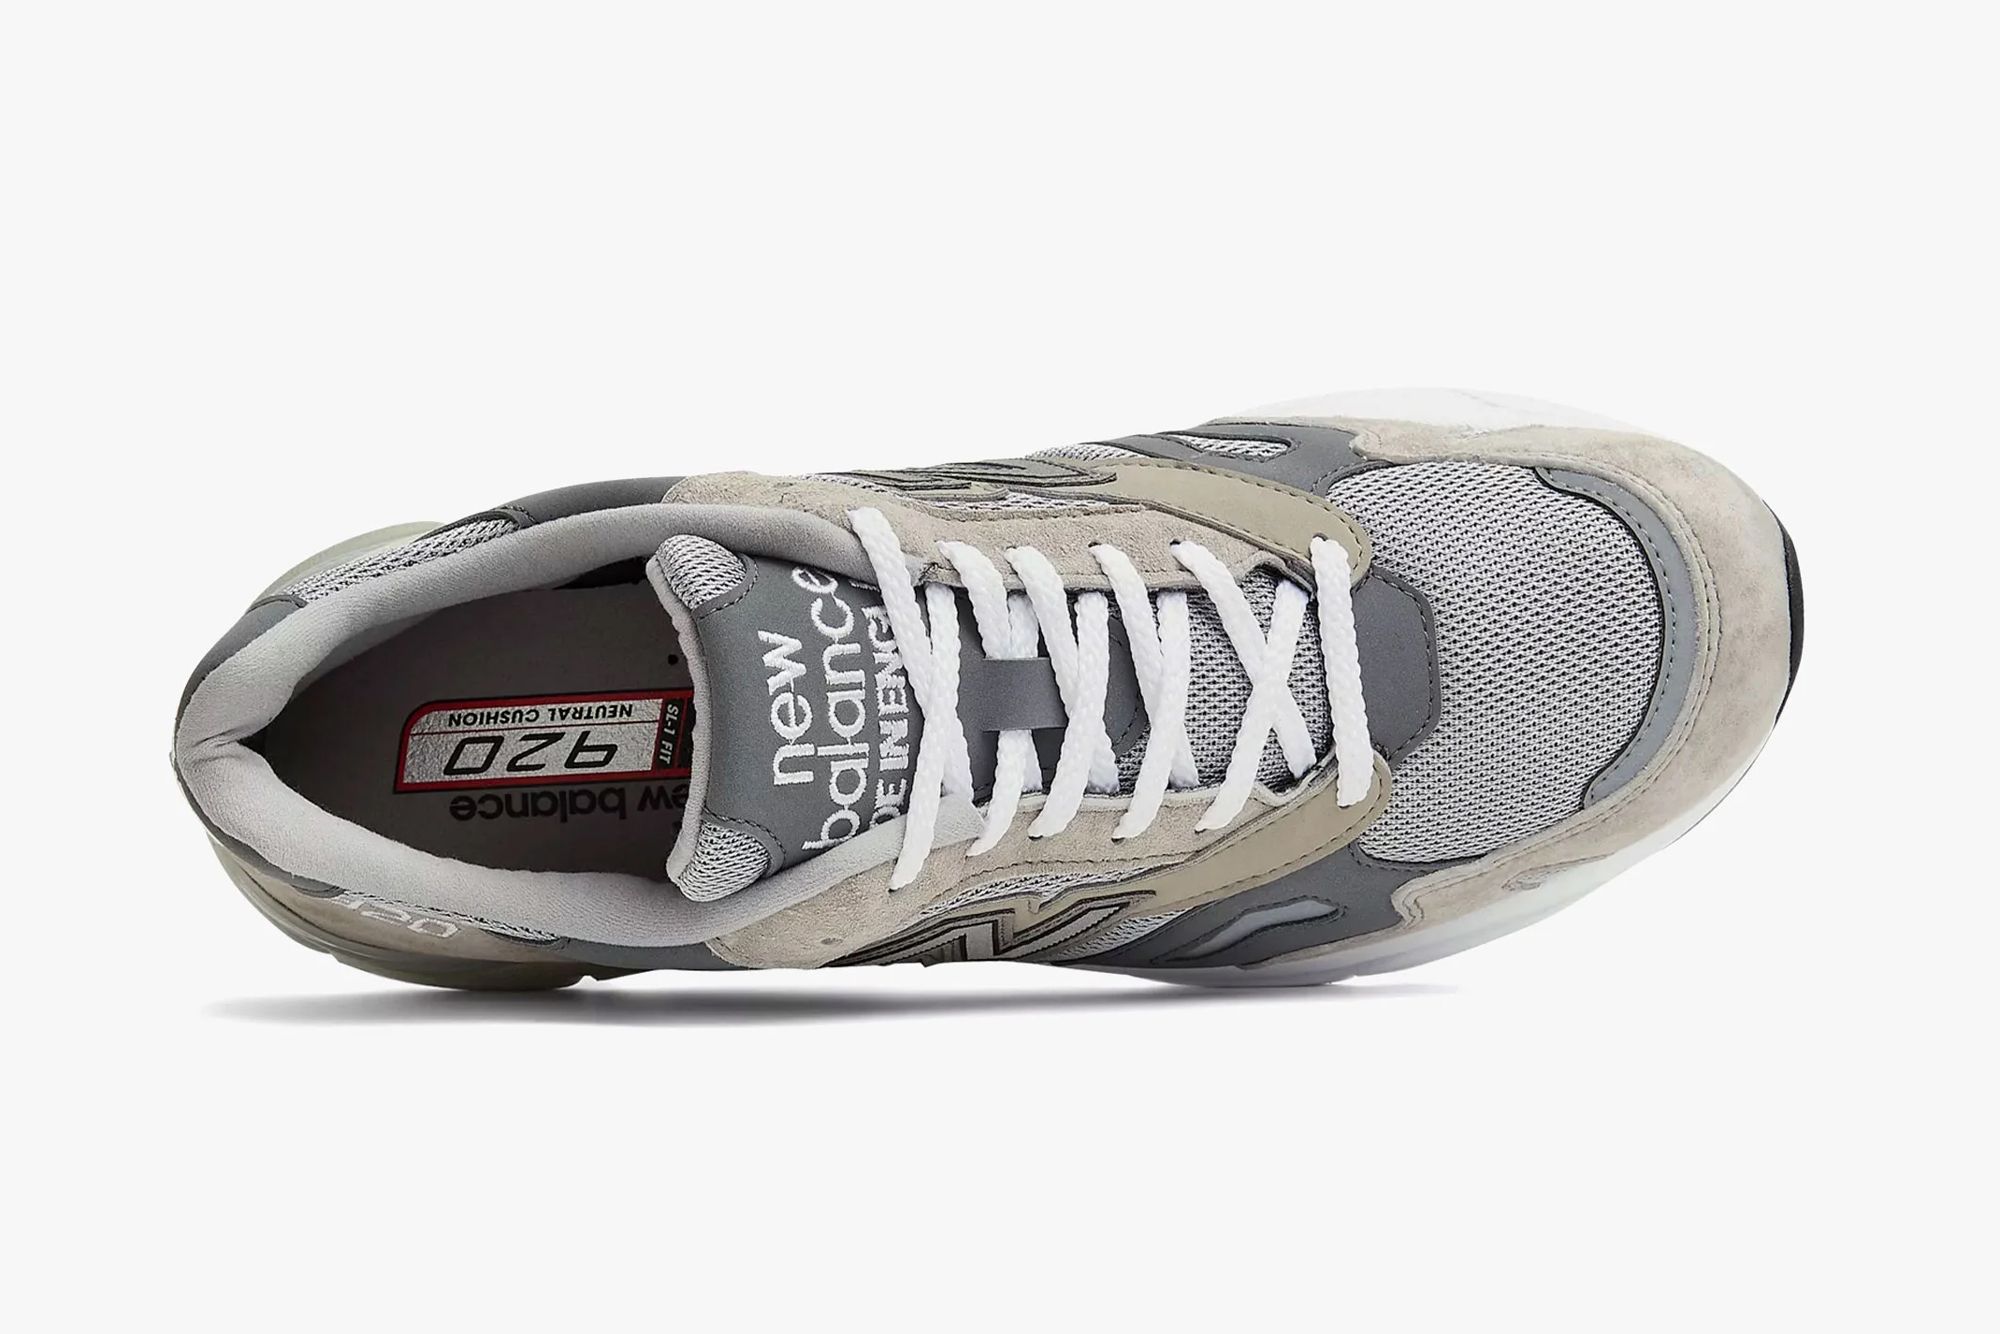 Release Date: New Balance 920 M920GRY